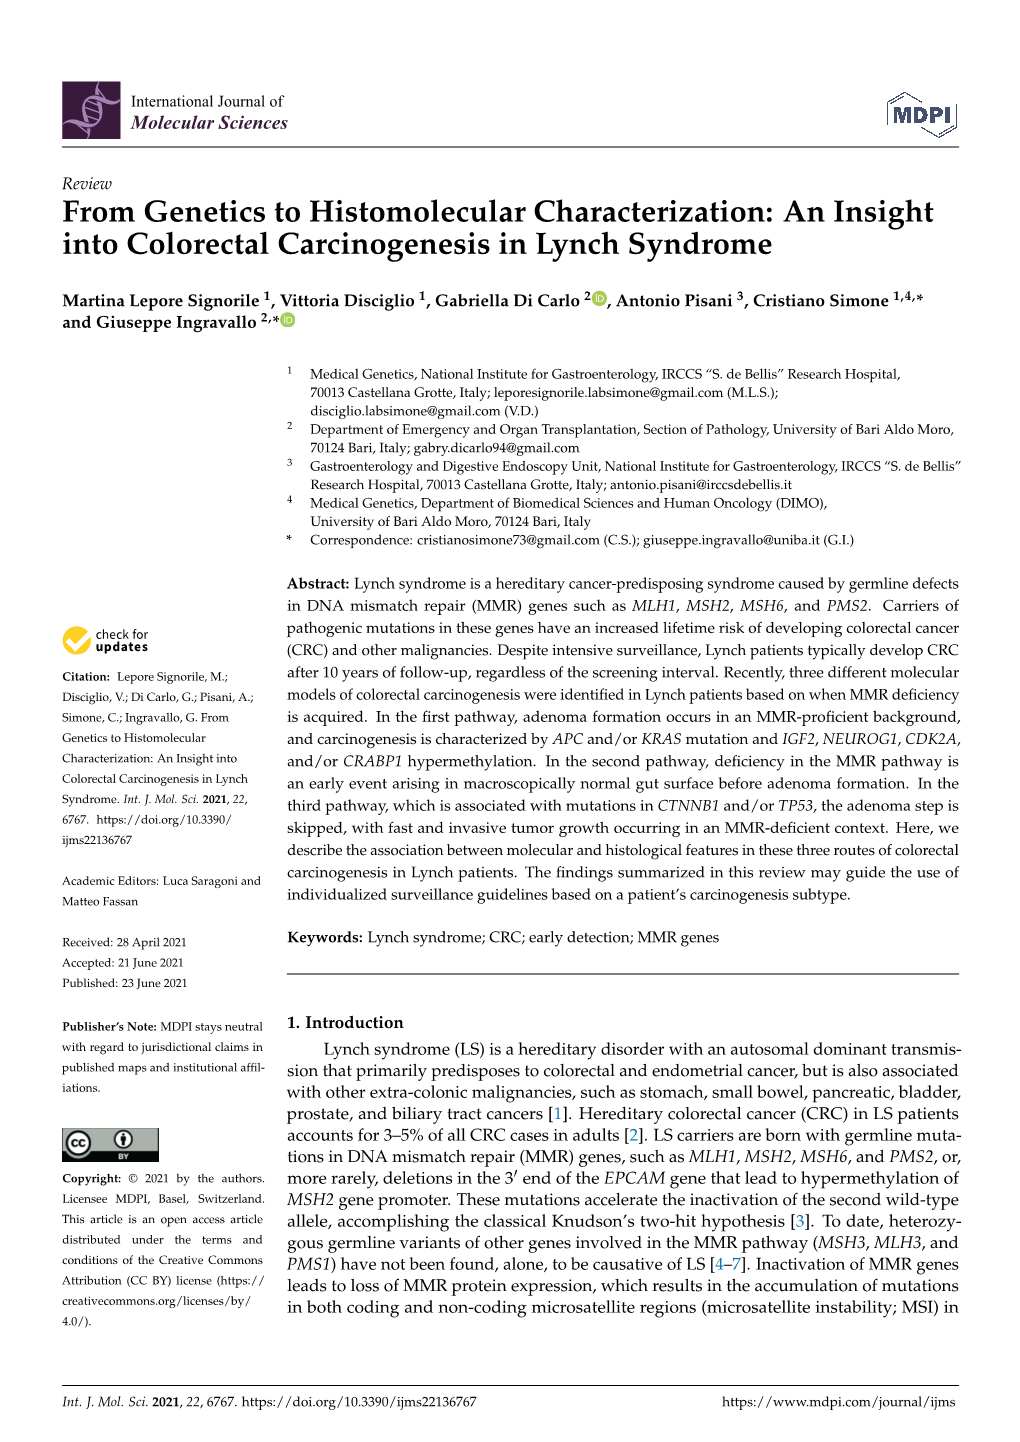 An Insight Into Colorectal Carcinogenesis in Lynch Syndrome